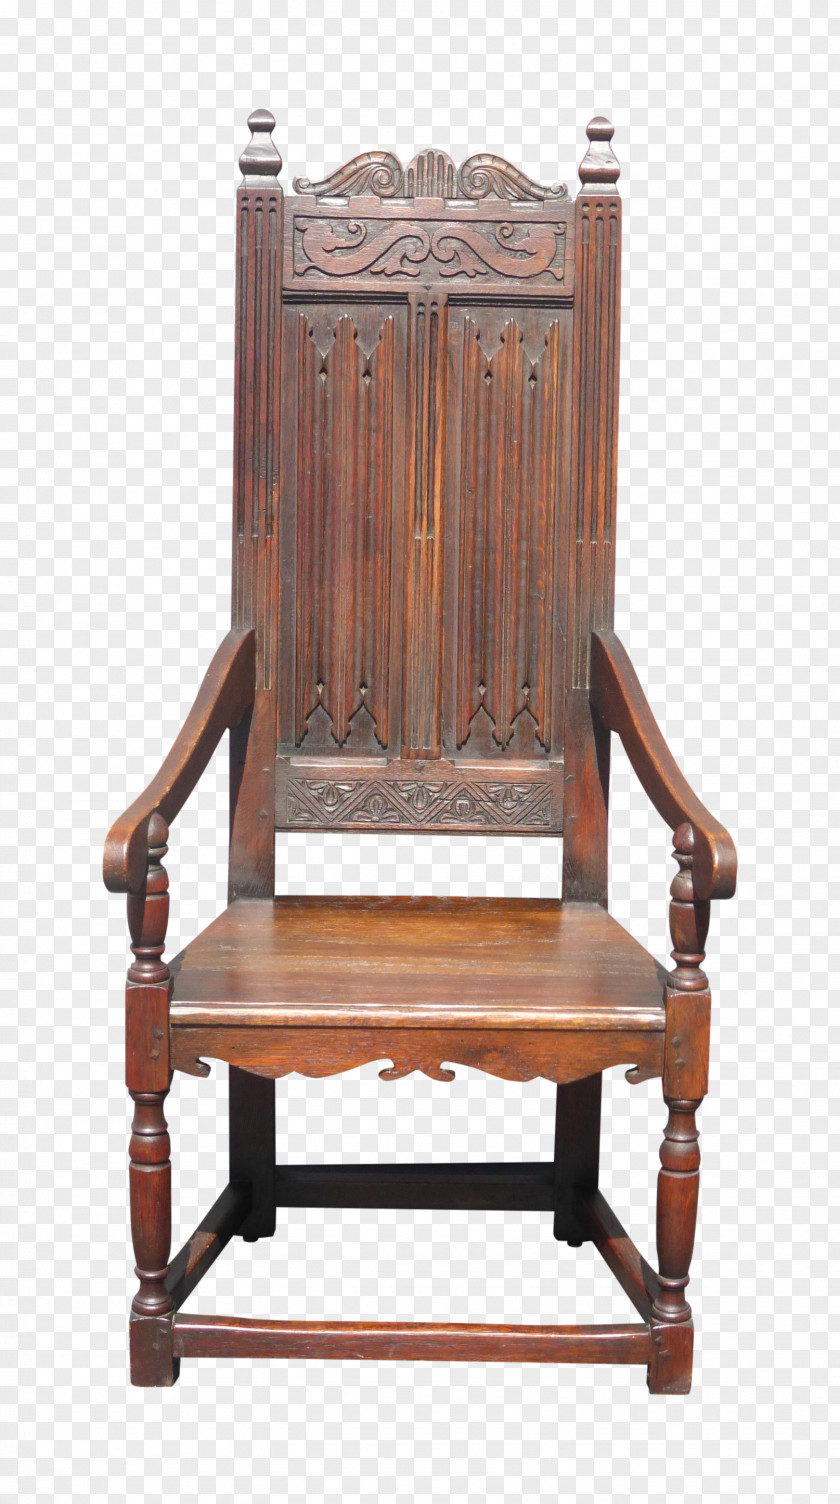 Throne Chair Furniture Table Dining Room PNG